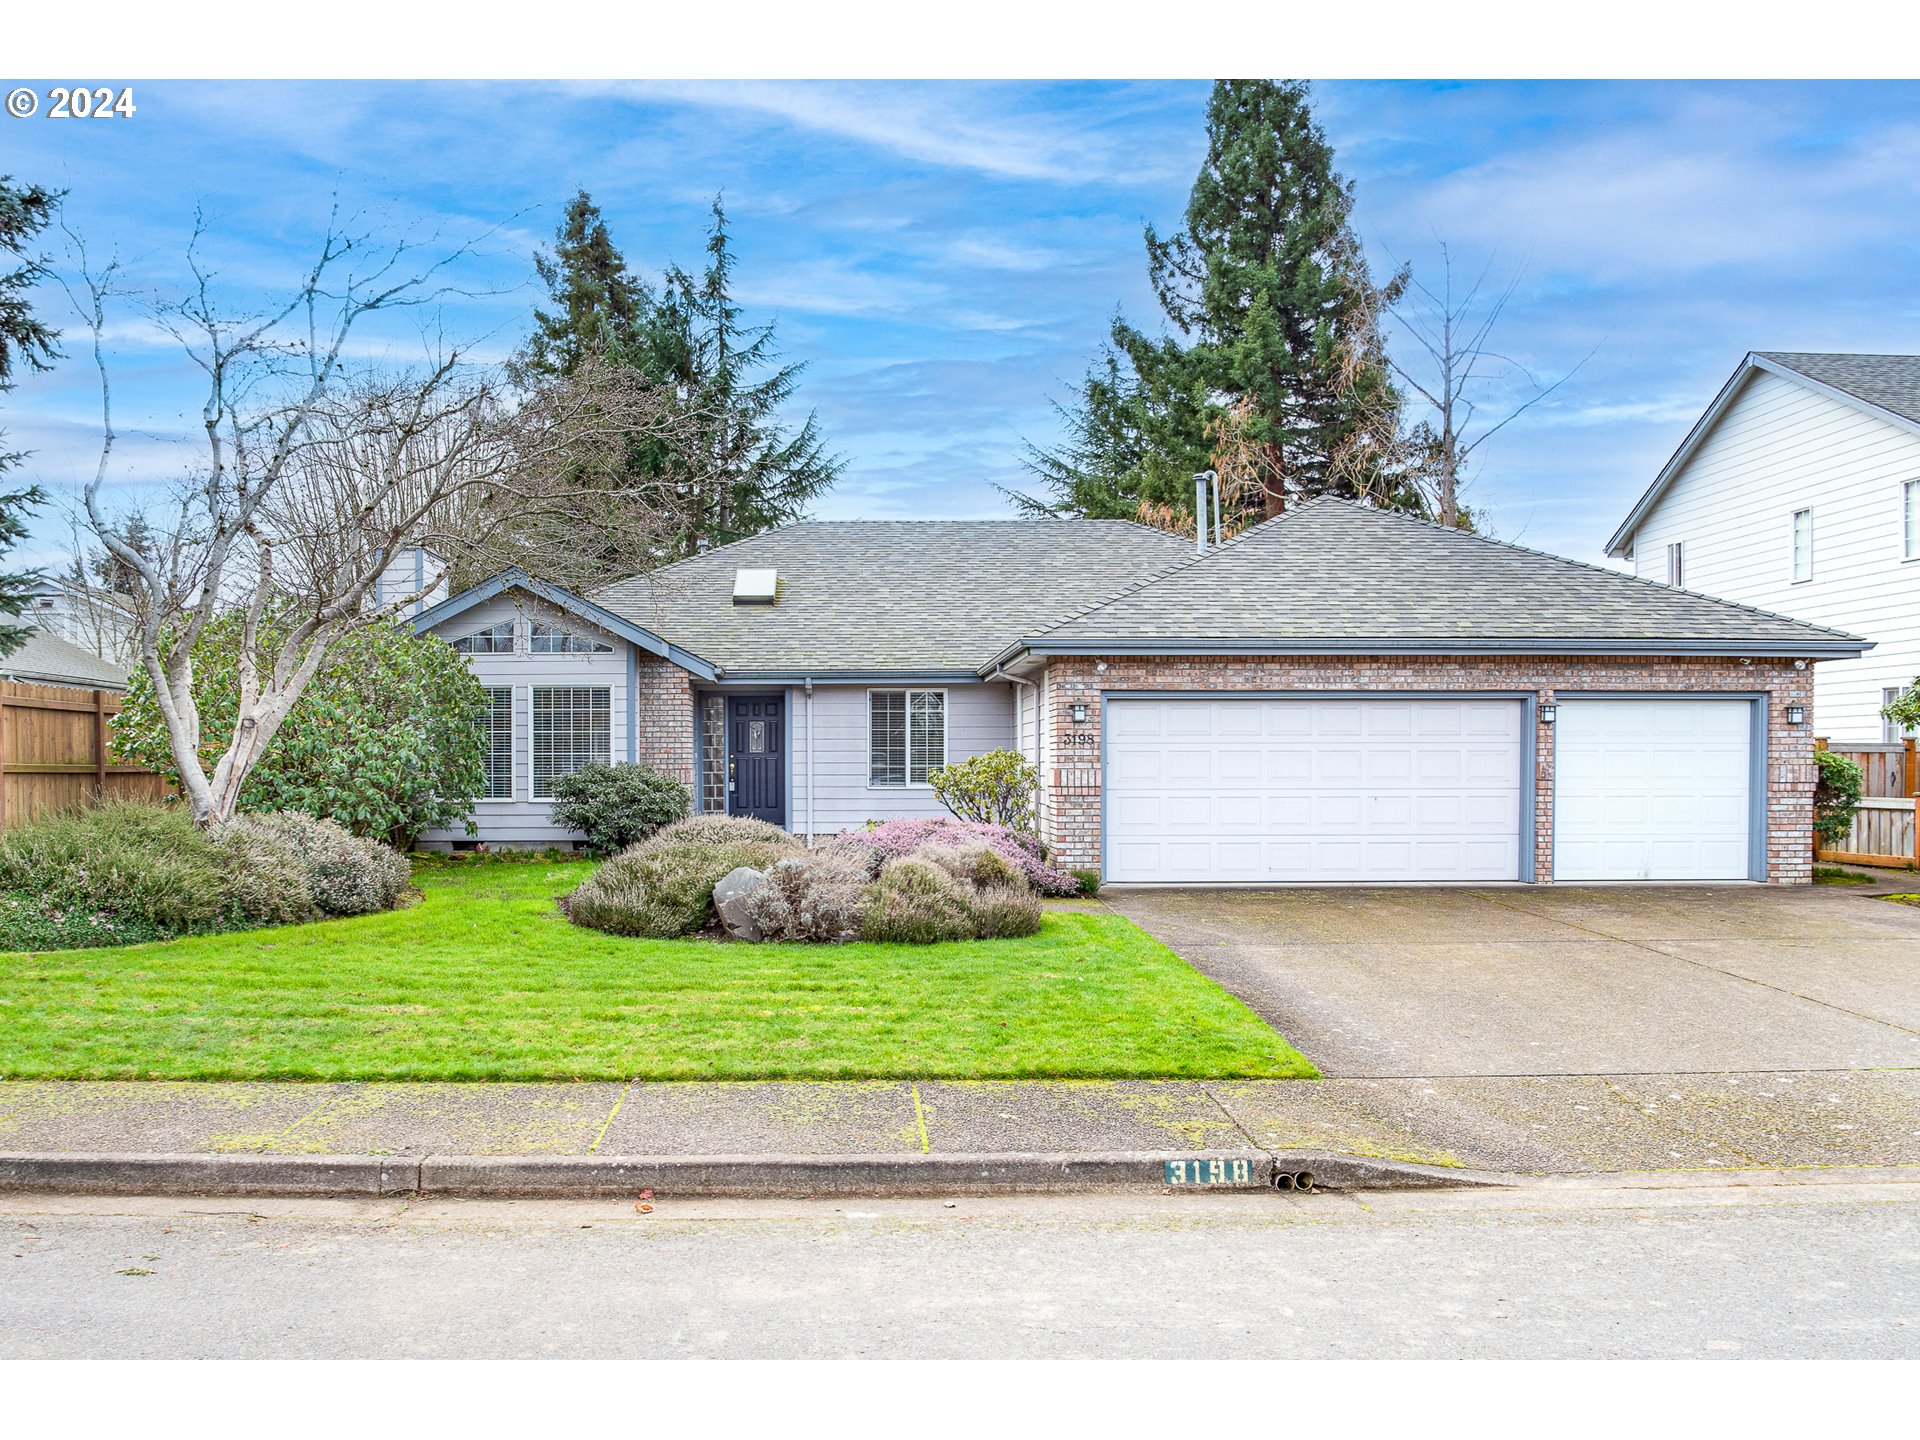 3198 QUEENS EAST ST, Eugene, OR 